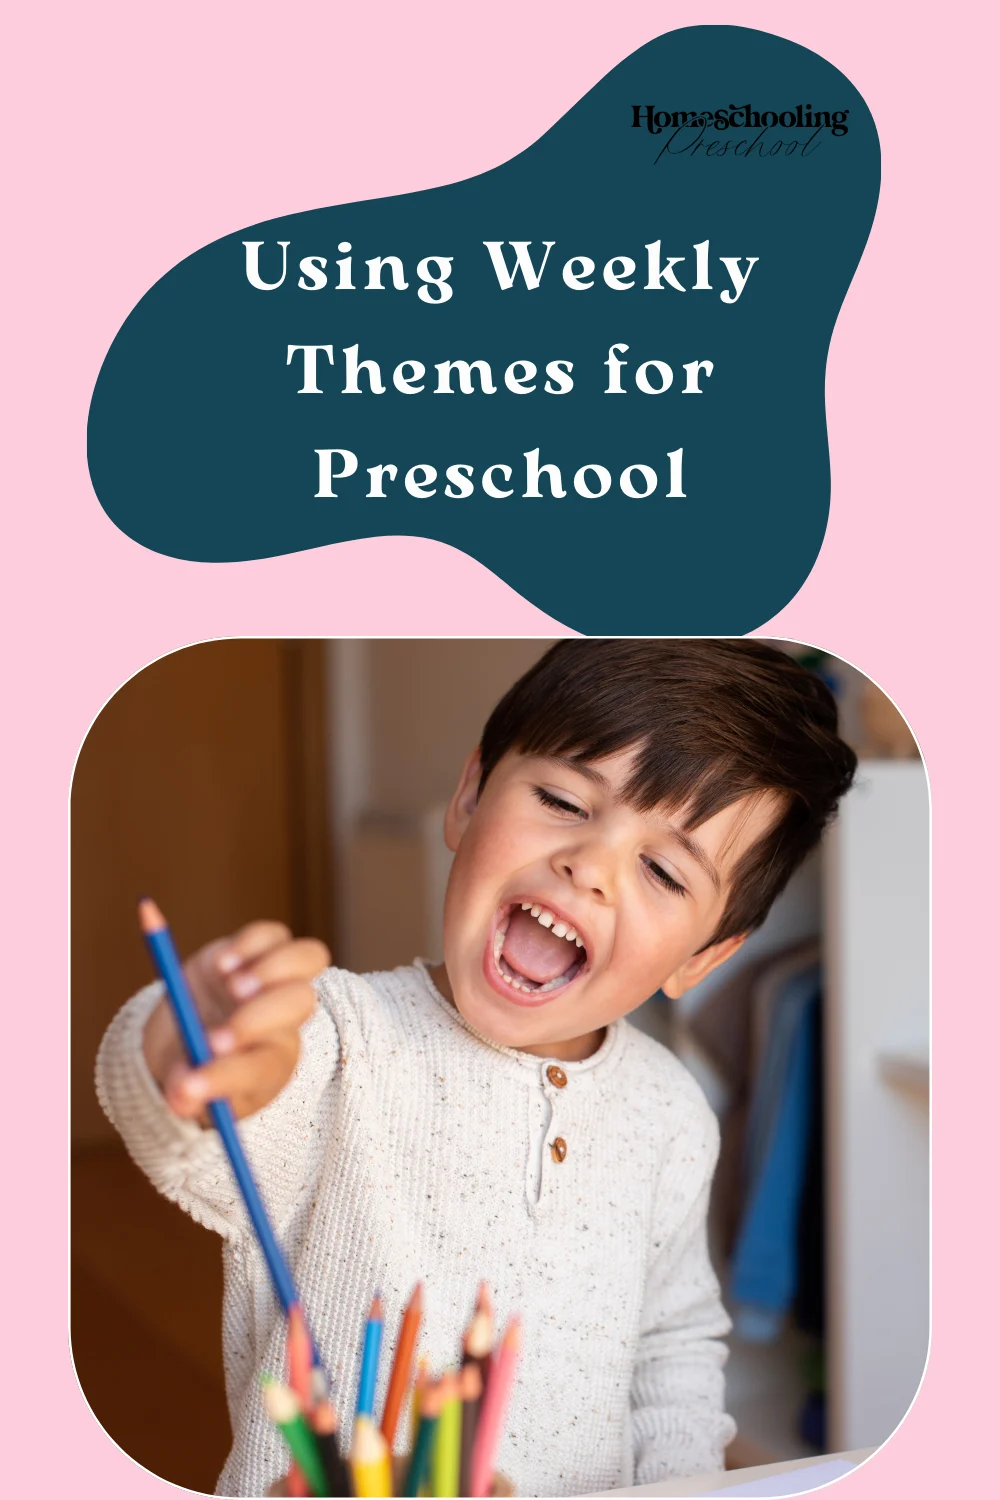 Using Weekly Themes for Preschool